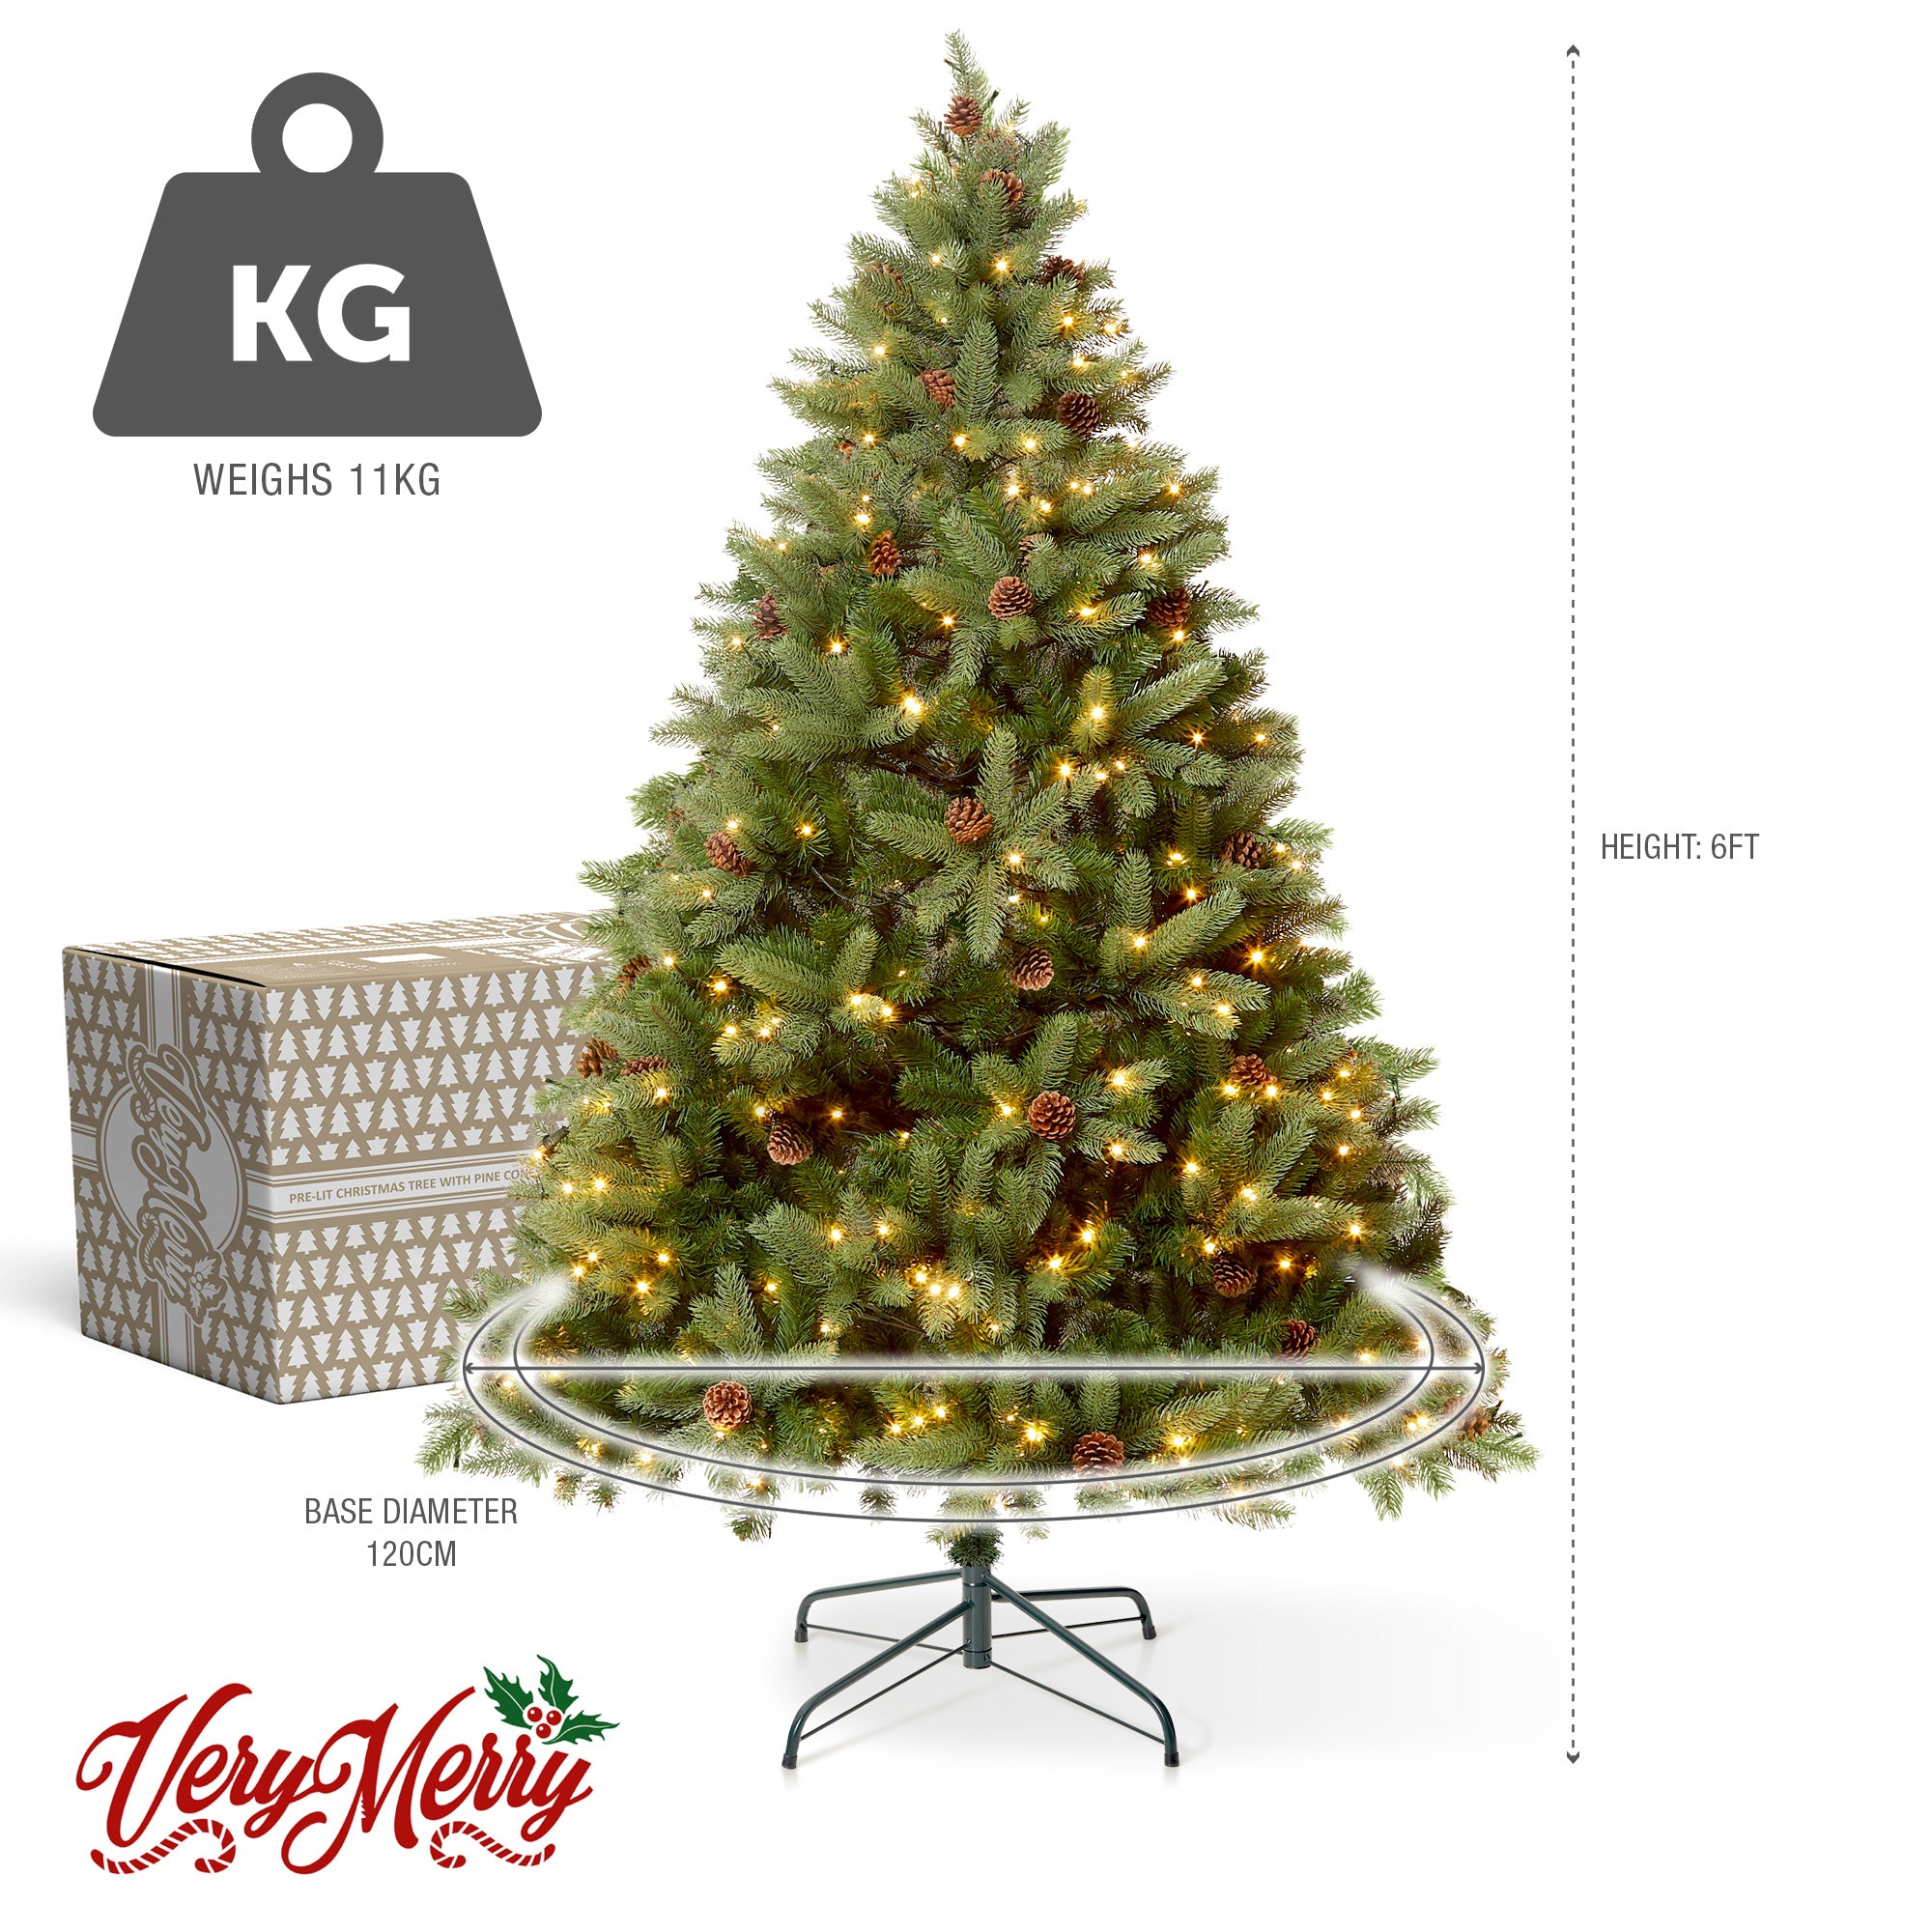 VeryMerry 6FT 'Ascot' Pre-Lit Christmas Tree with 300 Built-In Warm White LED Lights with Auto-Off Timer, 8 Lighting Modes and Real Decorative Pinecones